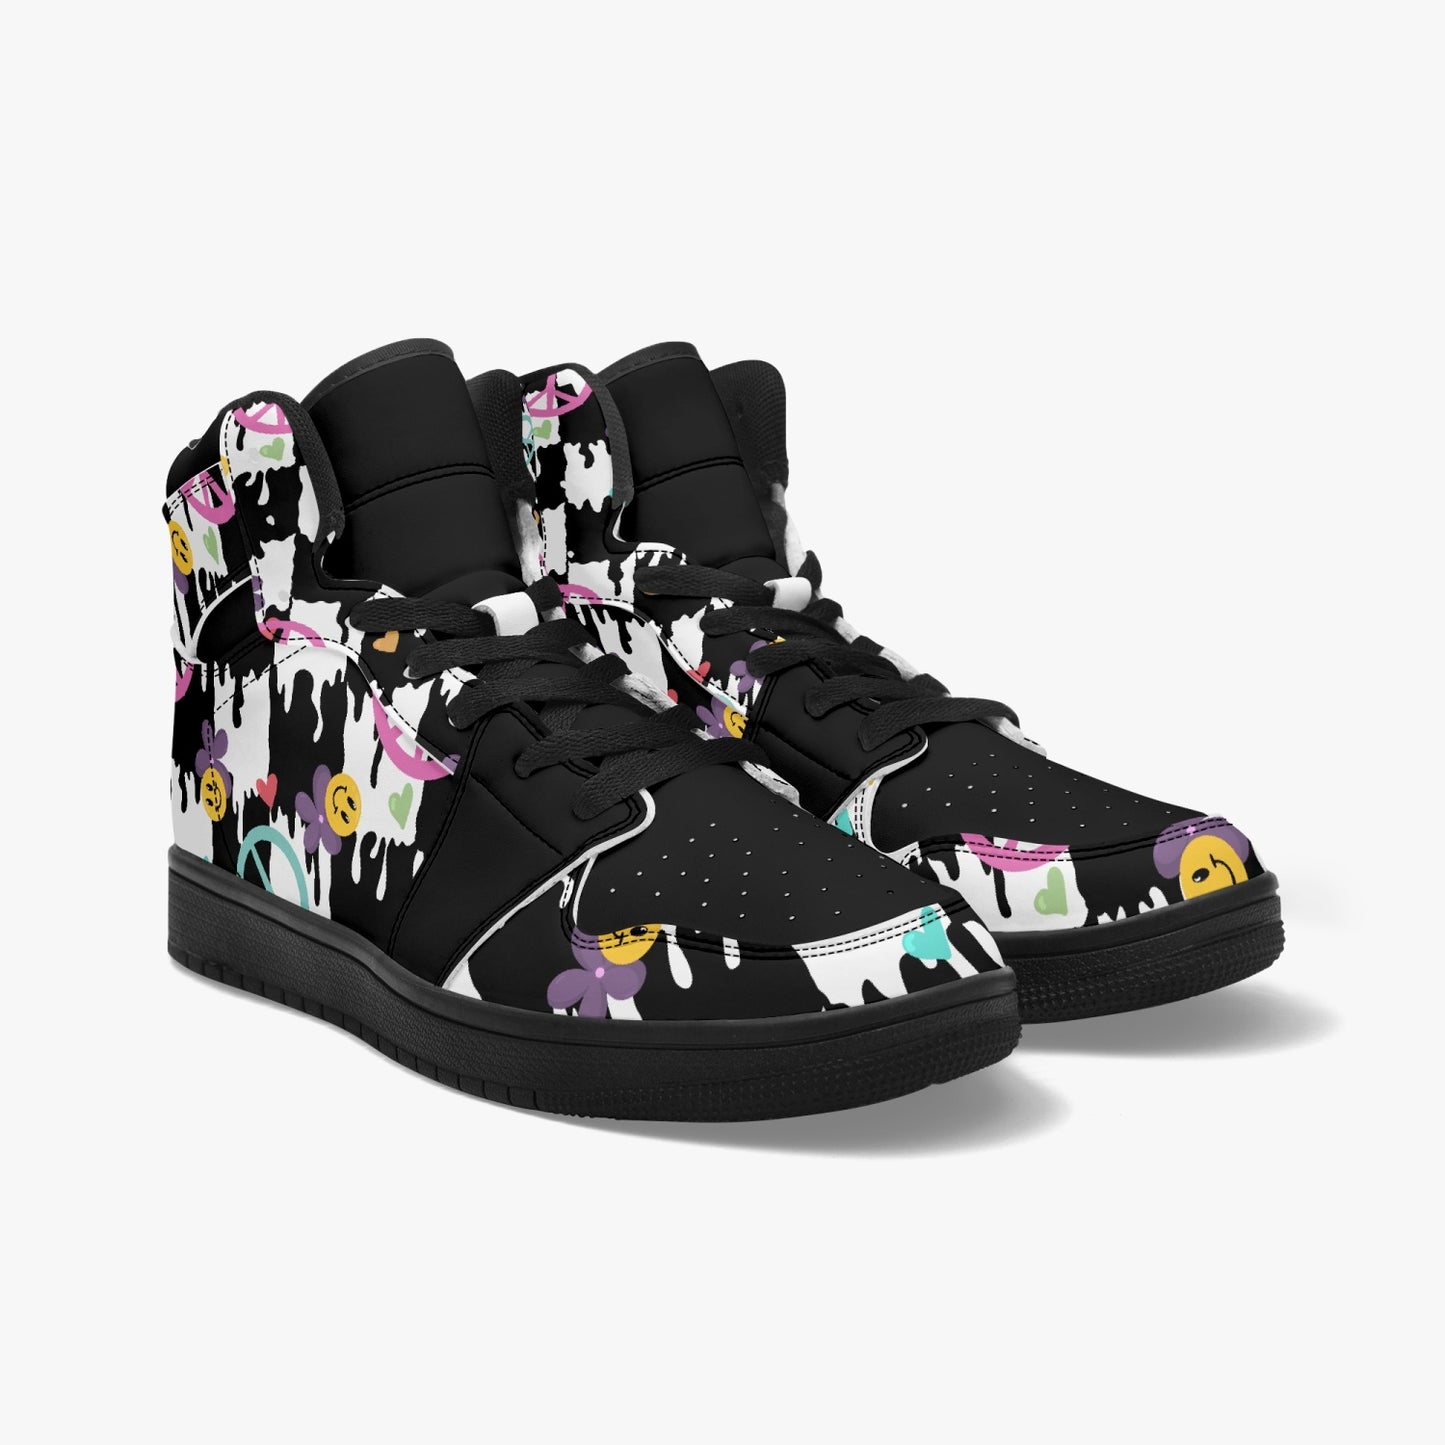 Psychedelic Smiley Sneakers for Adults